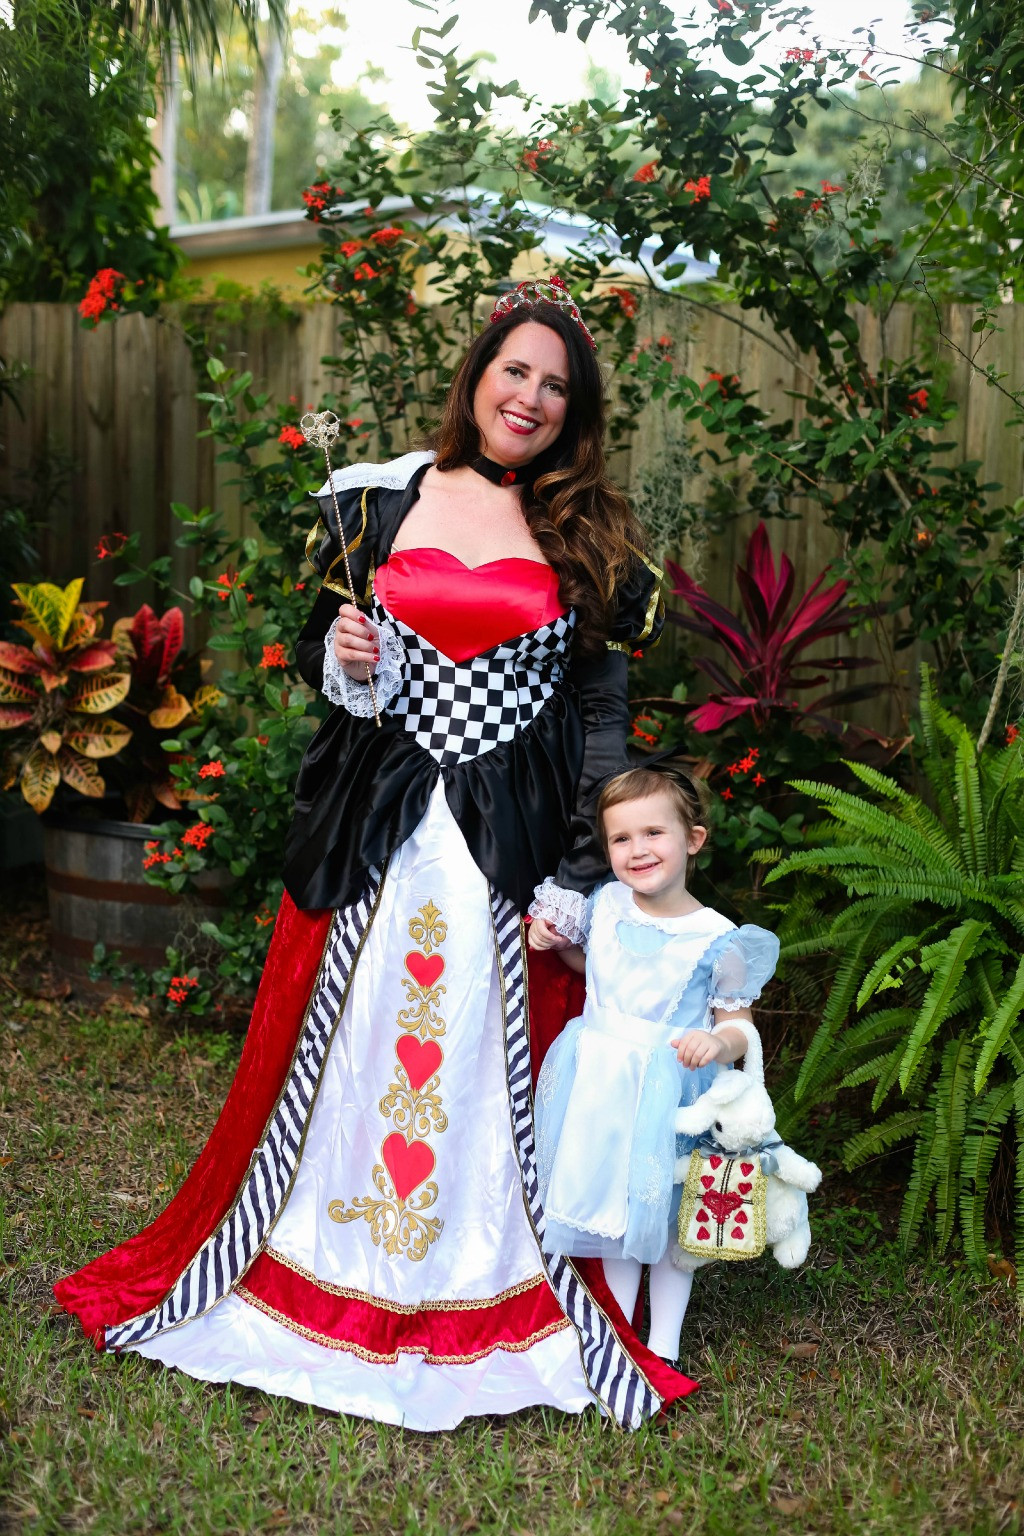 Halloween Party Costume Ideas
 Mommy and Me Halloween Costume Ideas Alice in Wonderland